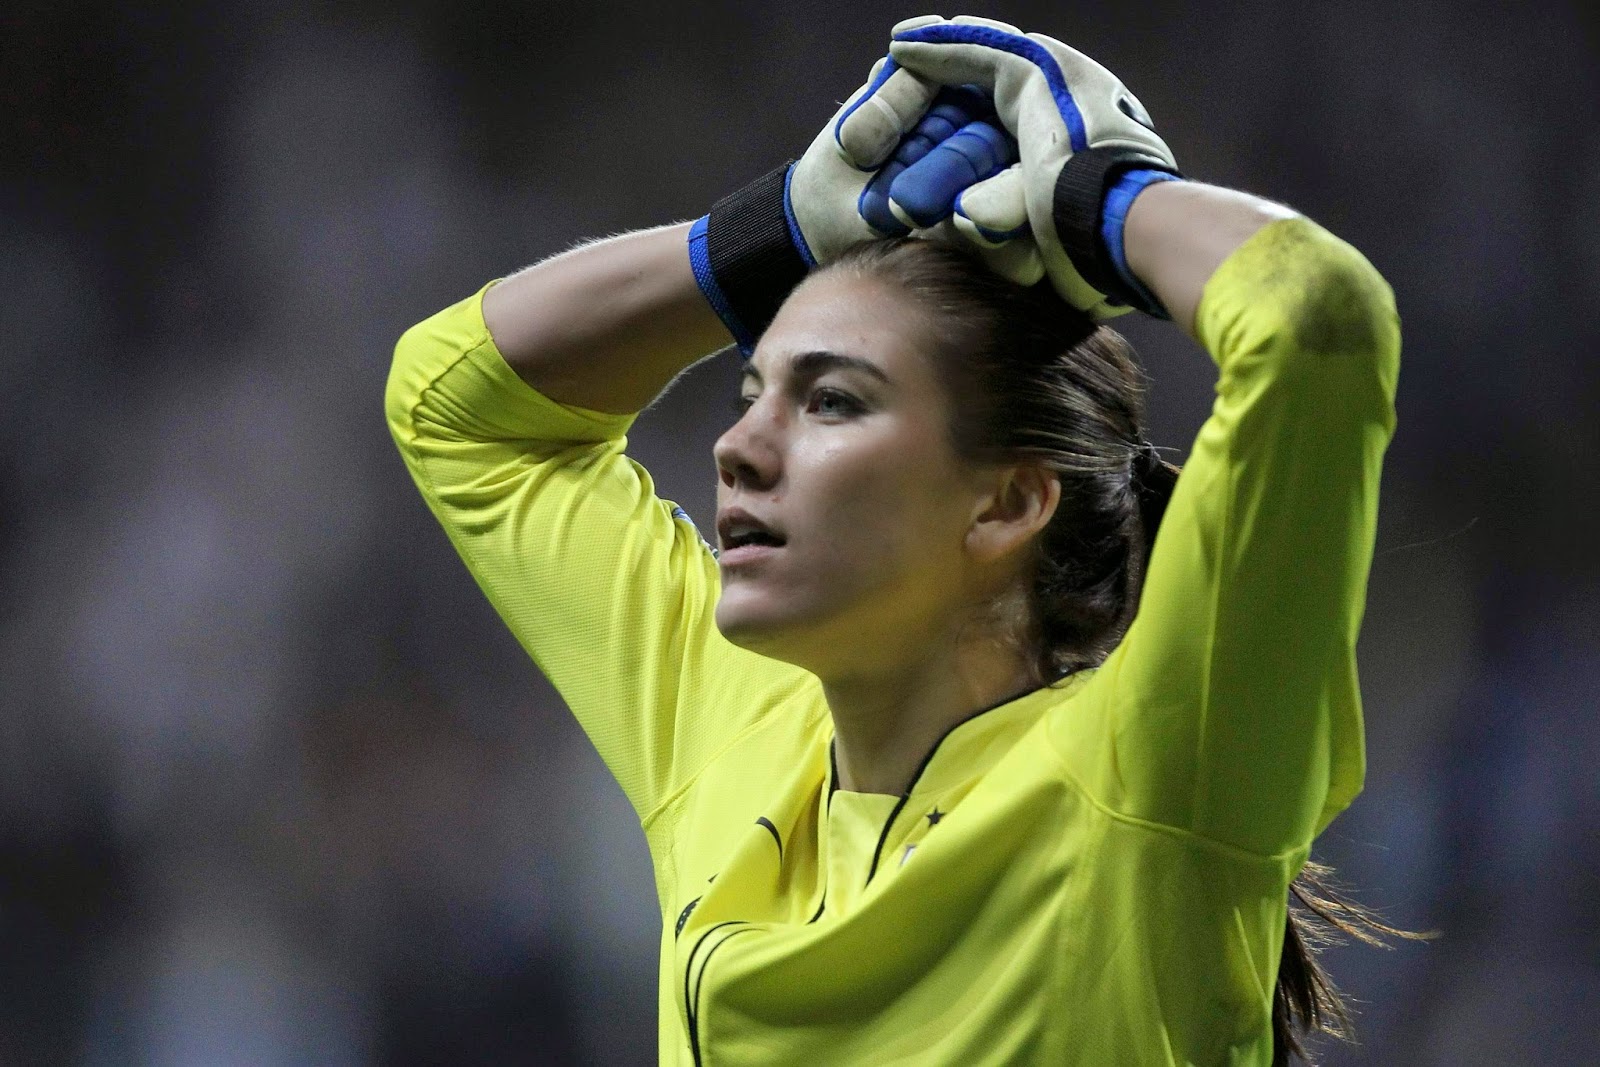 Fappening Hope Solo